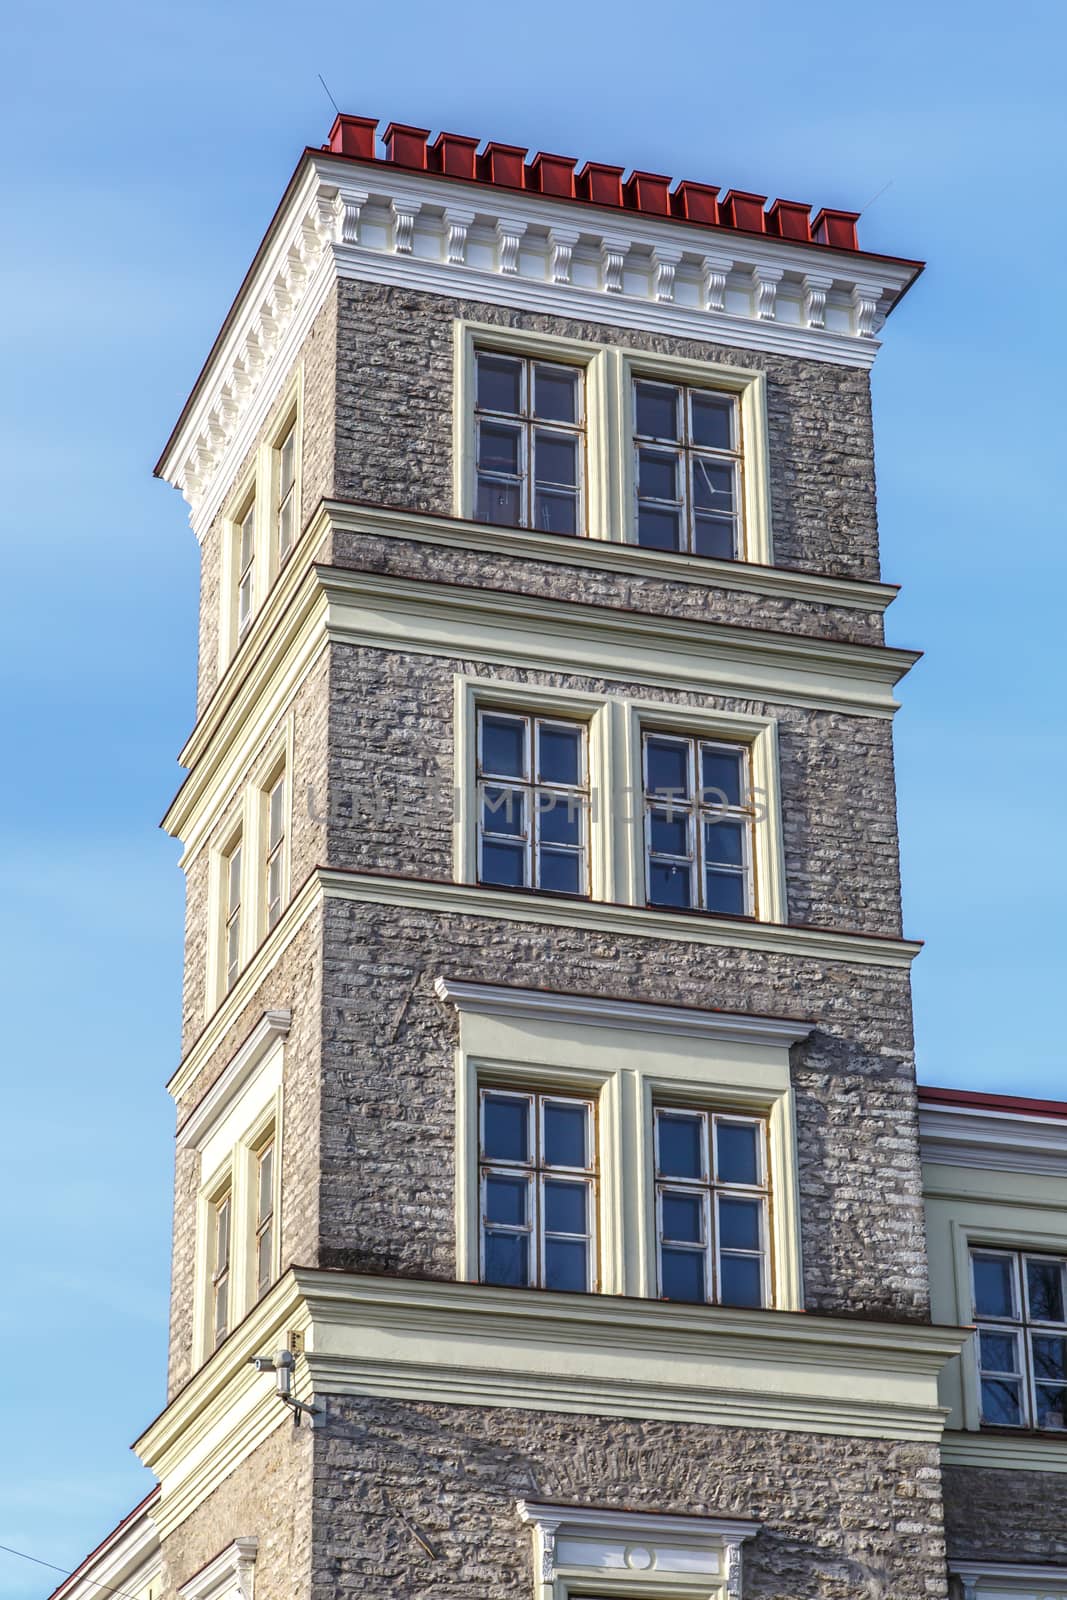 Close up view of stonewall building with four floors, on blue sky background.